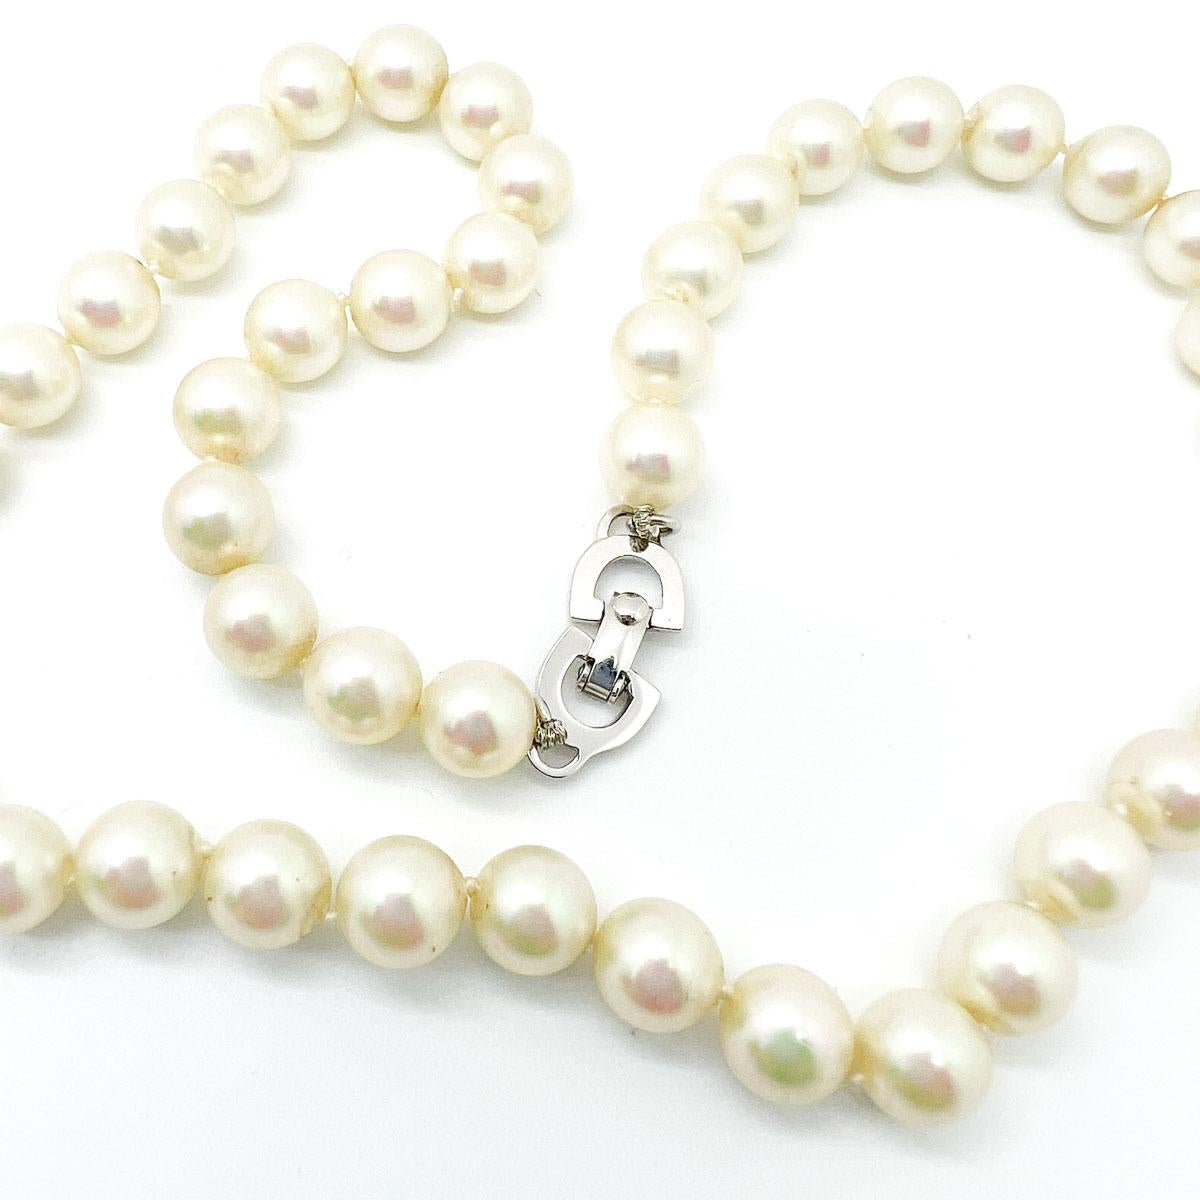 Vintage Christian Dior Pearl Rope Necklace 1980s In Good Condition For Sale In Wilmslow, GB